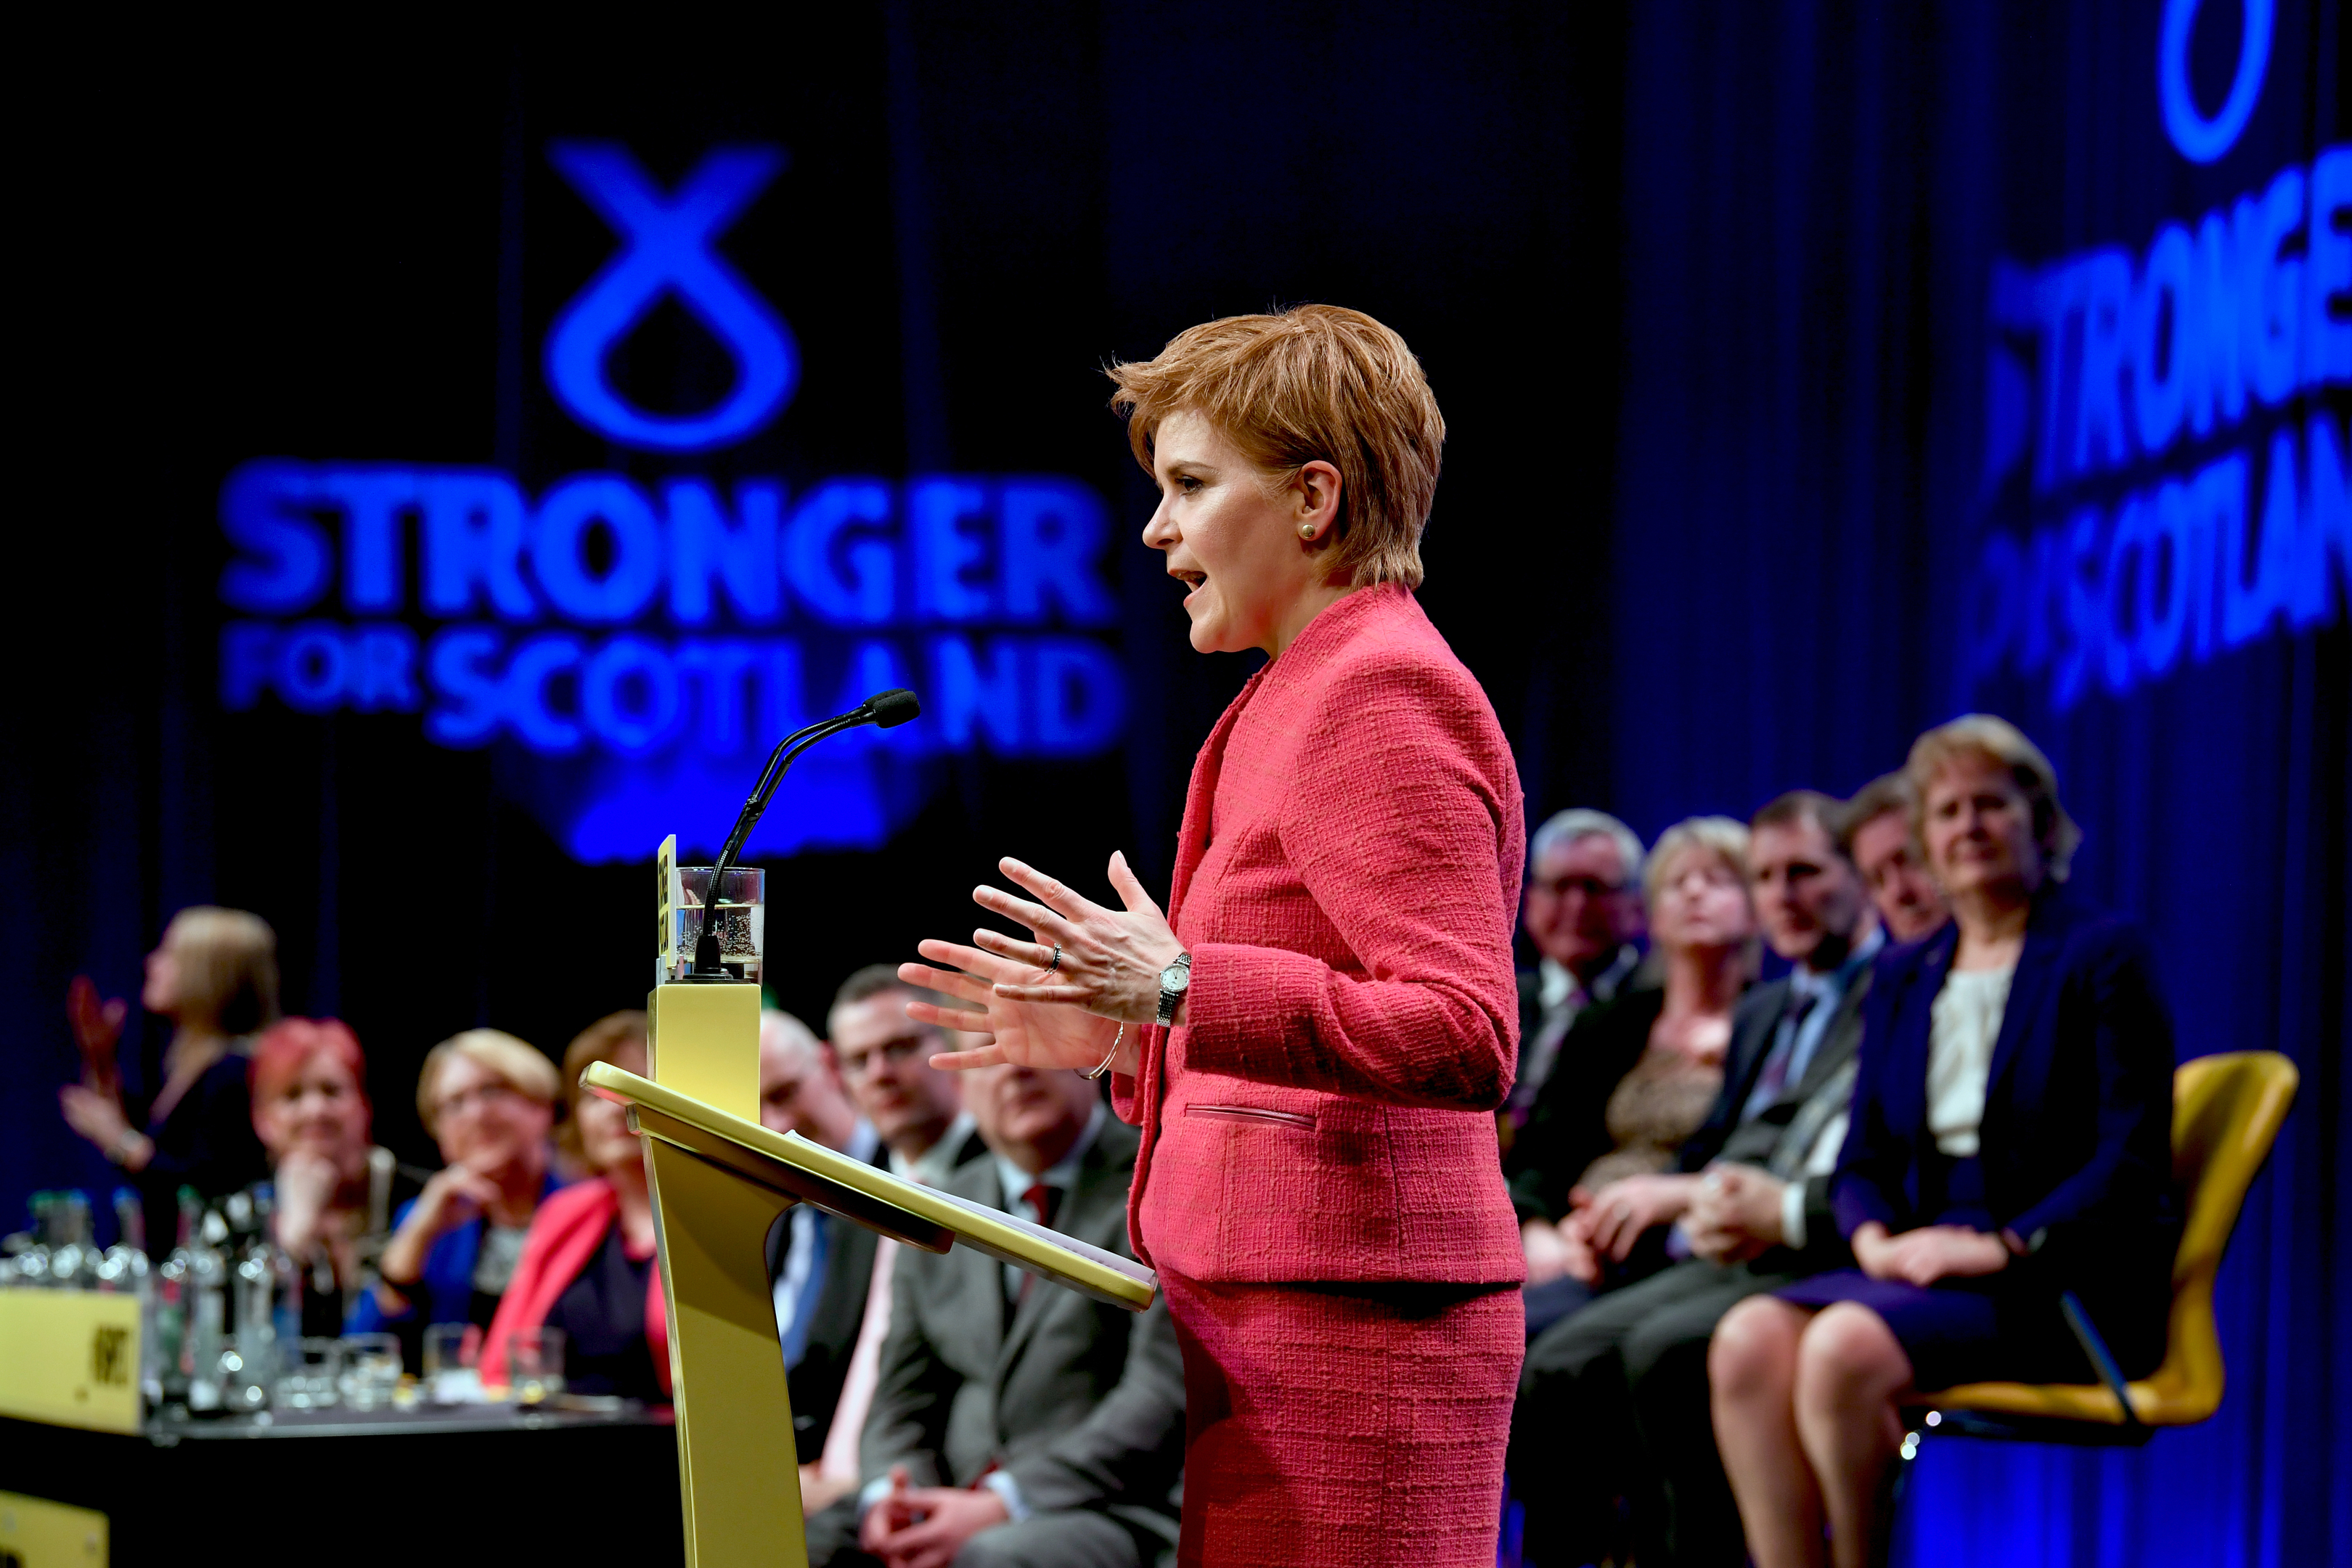 Delegates react after Scottish First Minister Nicola Sturgeon gave her keynote speech at the SNP spring conference on March 18, 2017 in Aberdeeen, Scotland. (Jeff J Mitchell/Getty Images)